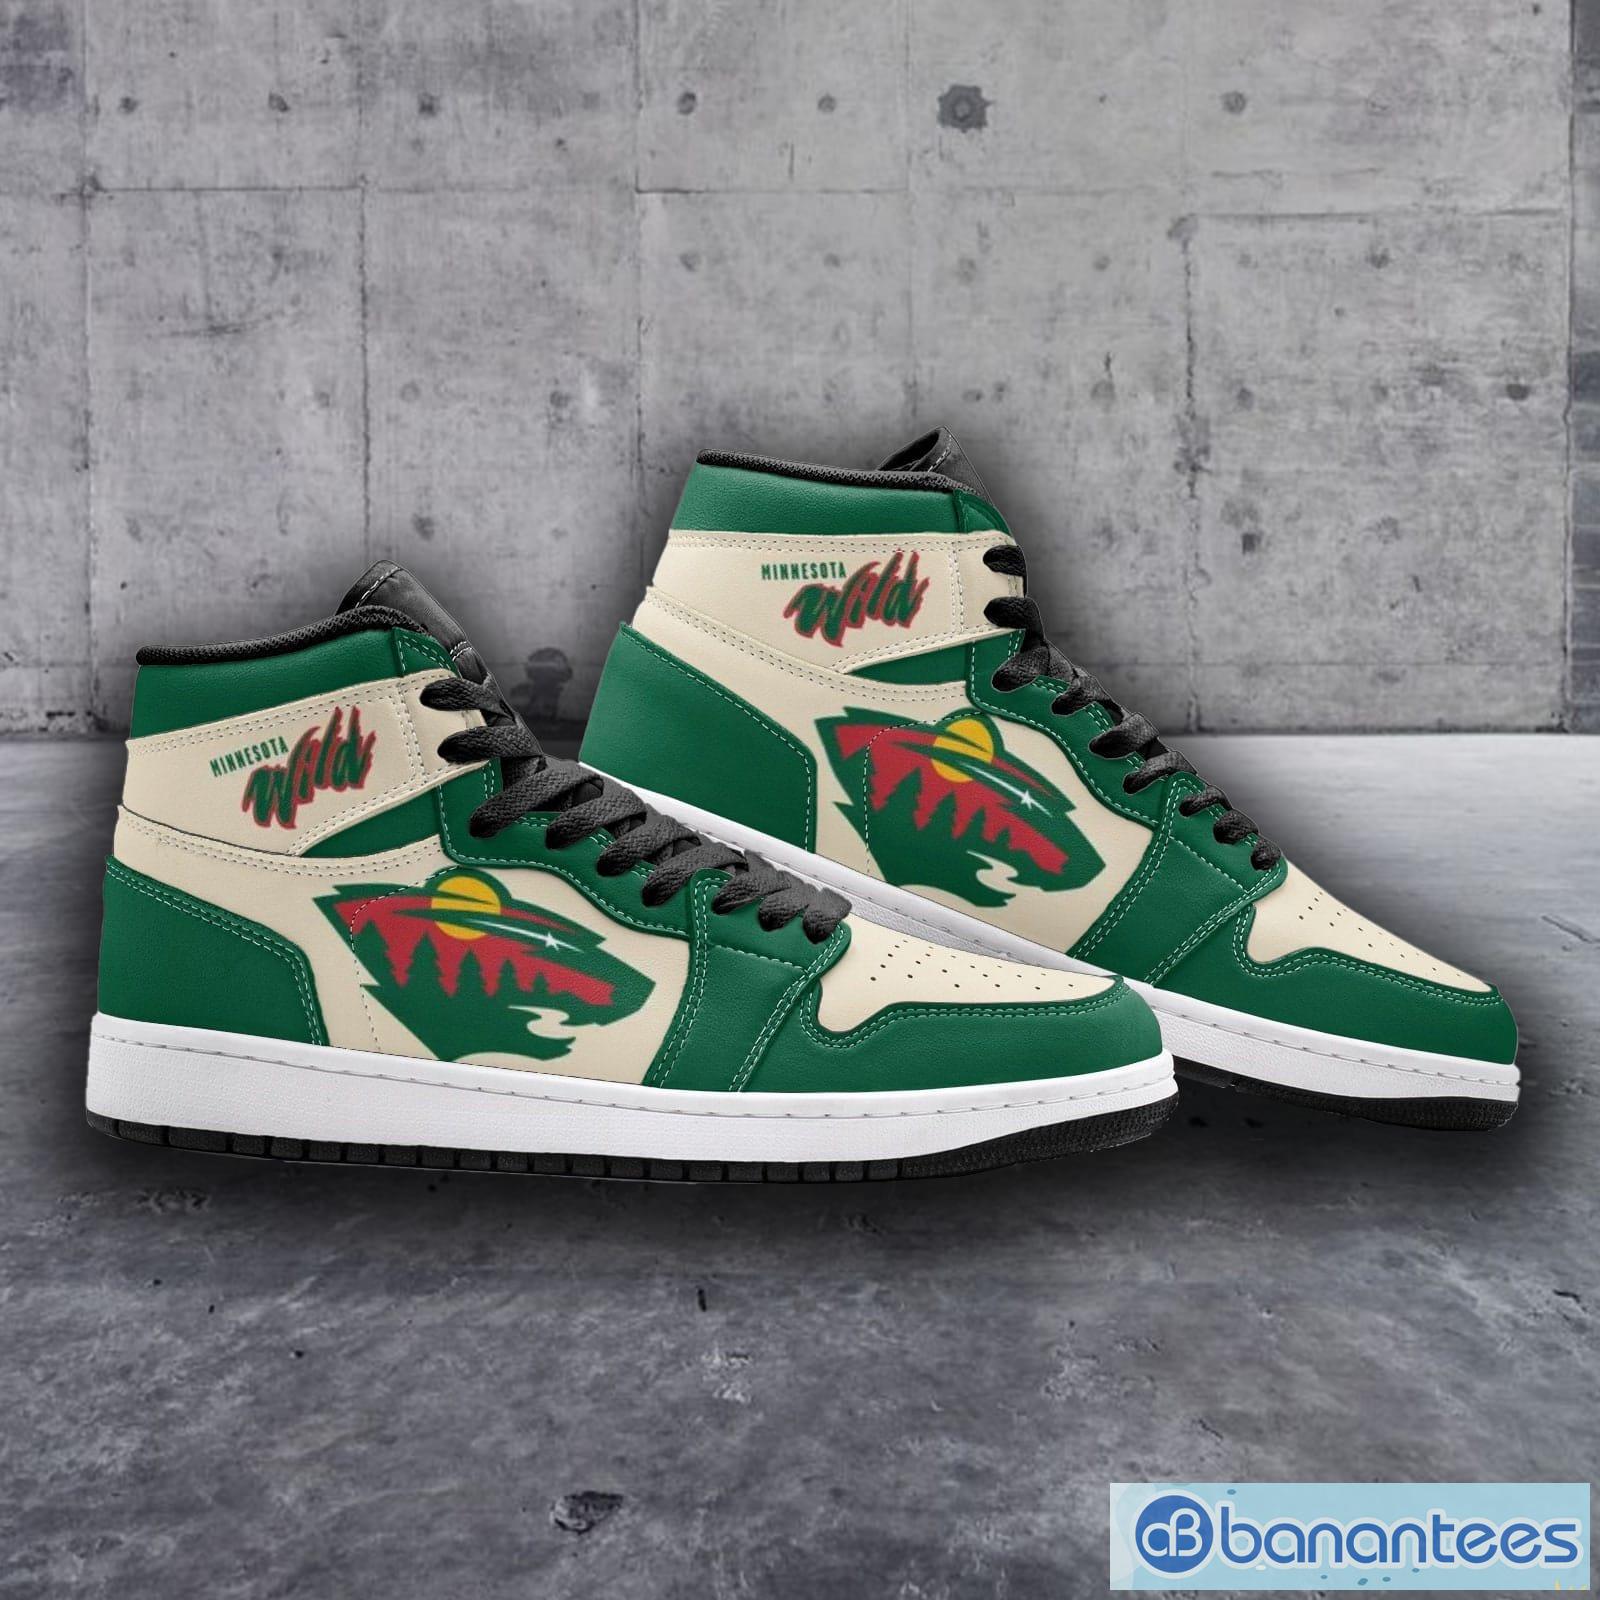 Minnesota Wild Fan Unofficial Running Shoes, Sneakers, Trainers Unisex